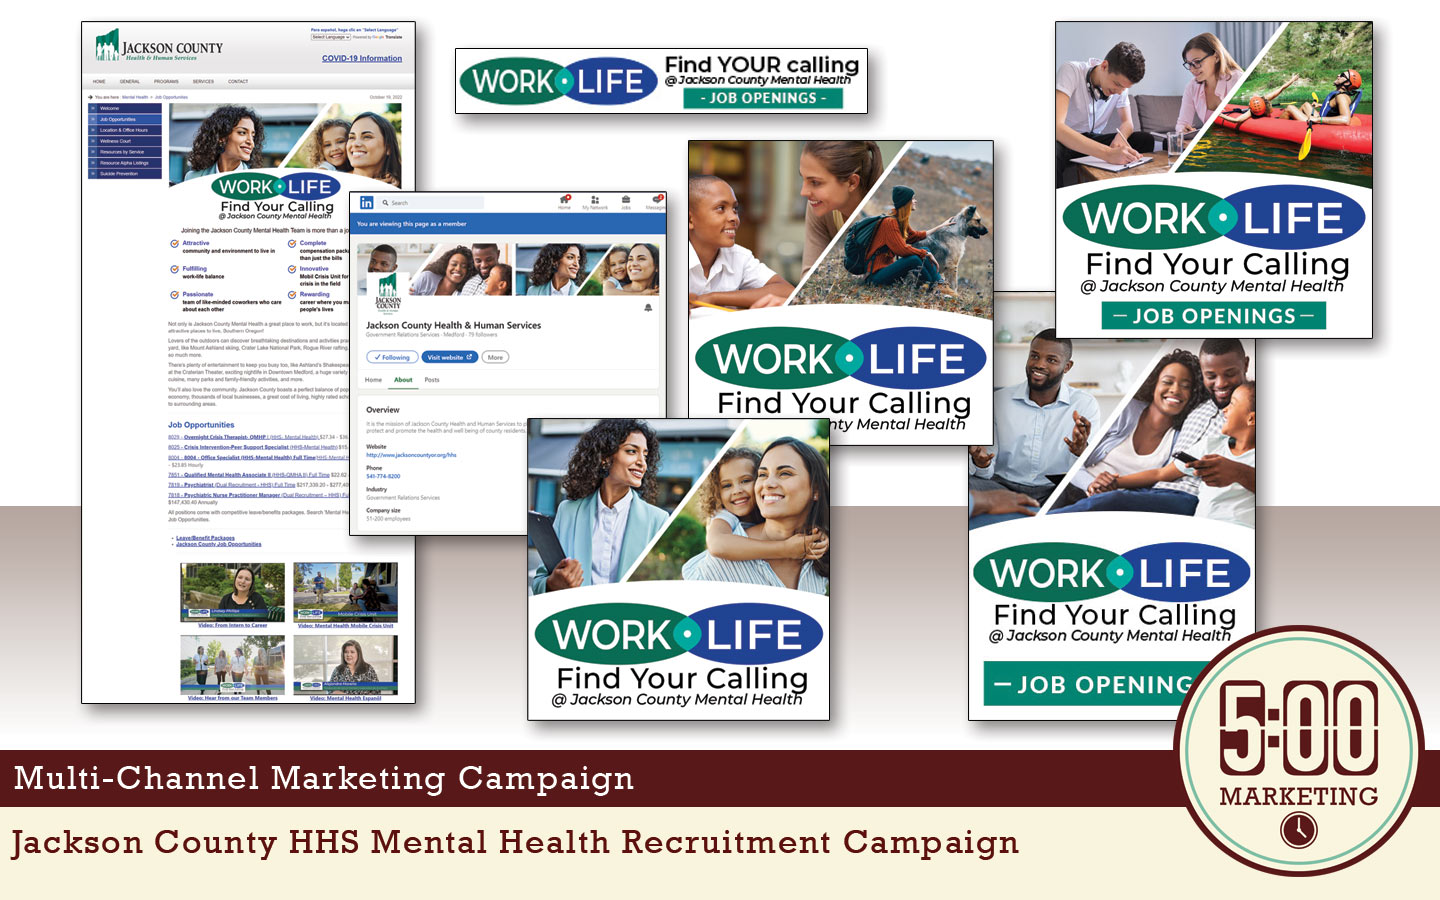 Jackson County HHS Mental Health Recruitment Campaign